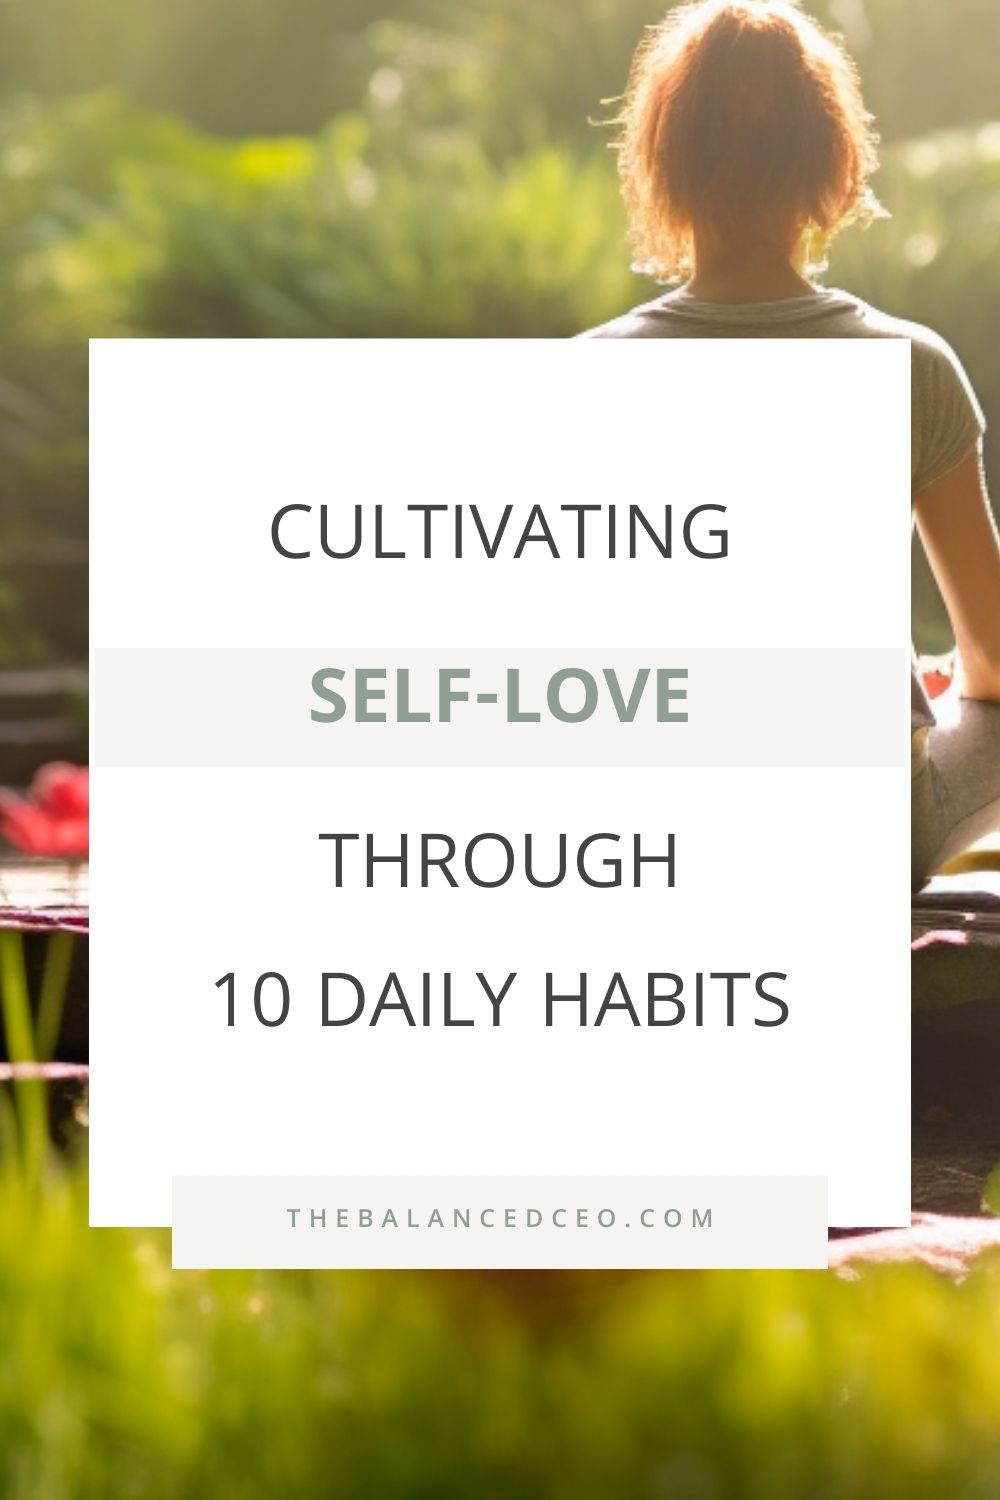 Cultivating Self-Love Through 10 Daily Habits